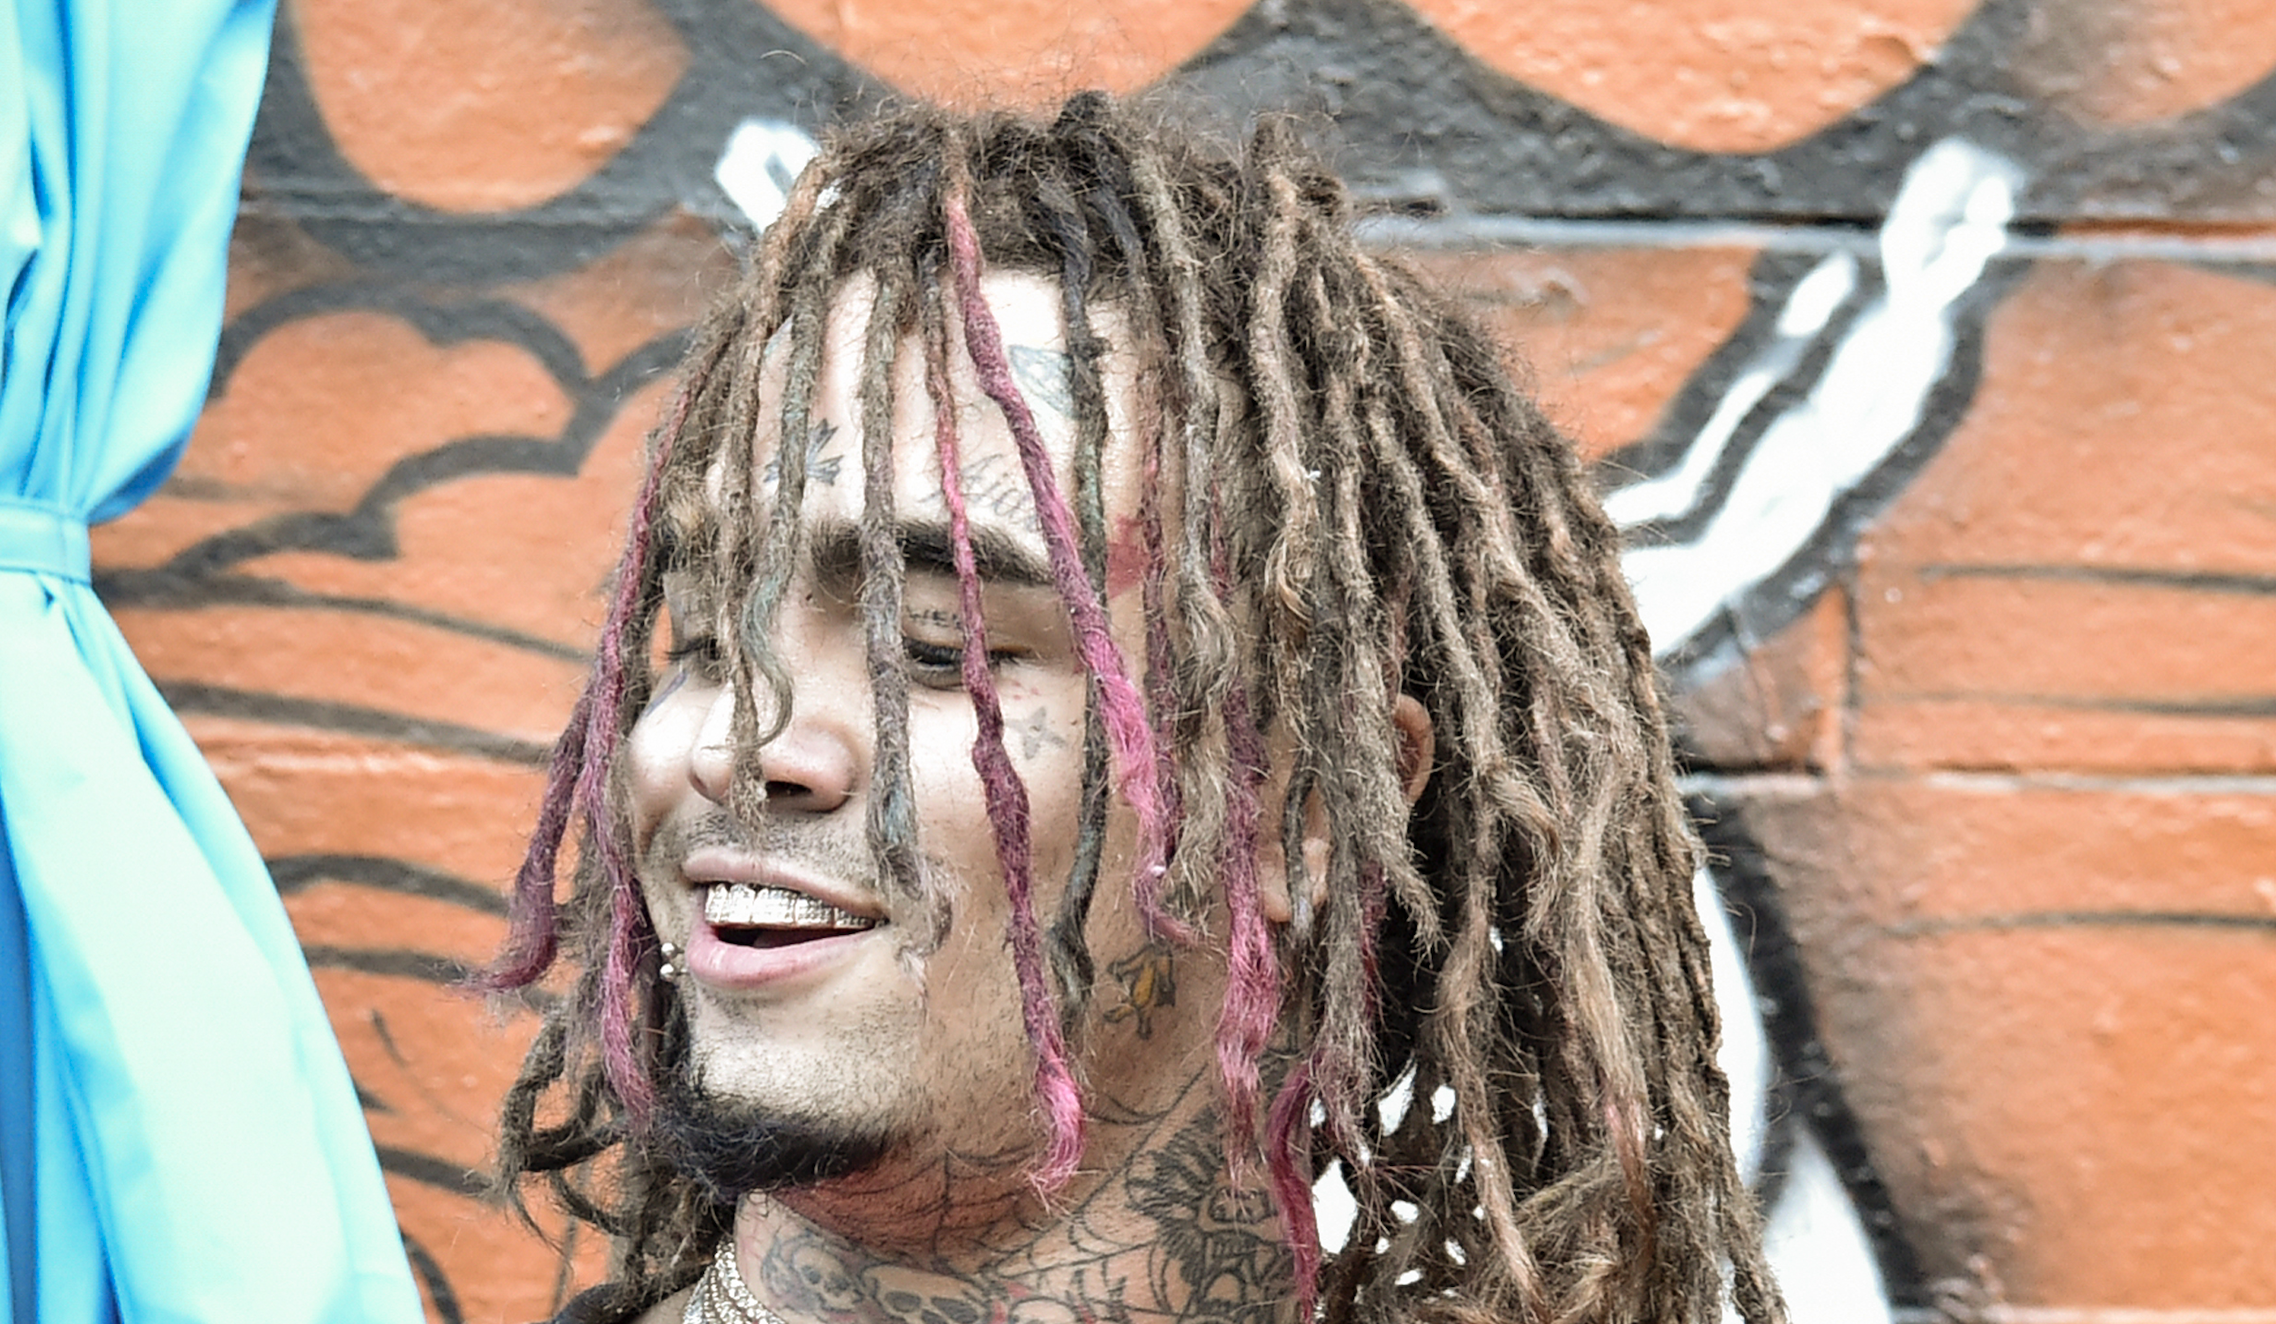 Jordbær Forhandle suge Lil Pump Gifts Fan Shoes Off His Feet, Kid Tries To Sell Them For $1,000